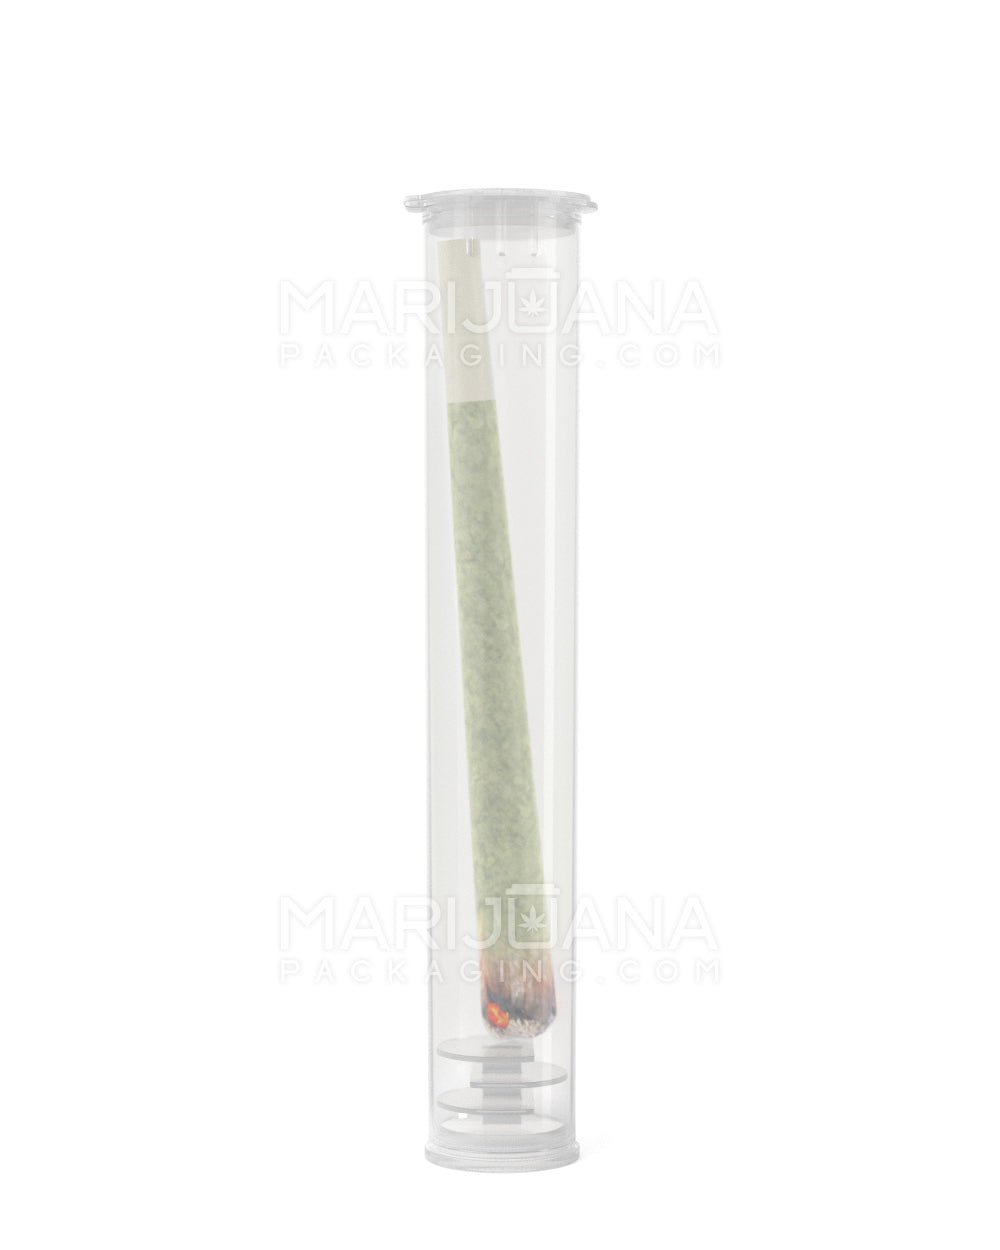 THINGYMAJIGGY | Ash-Trapping Pre-Roll Storage Tube | 125mm - Clear - 400 Count - 6